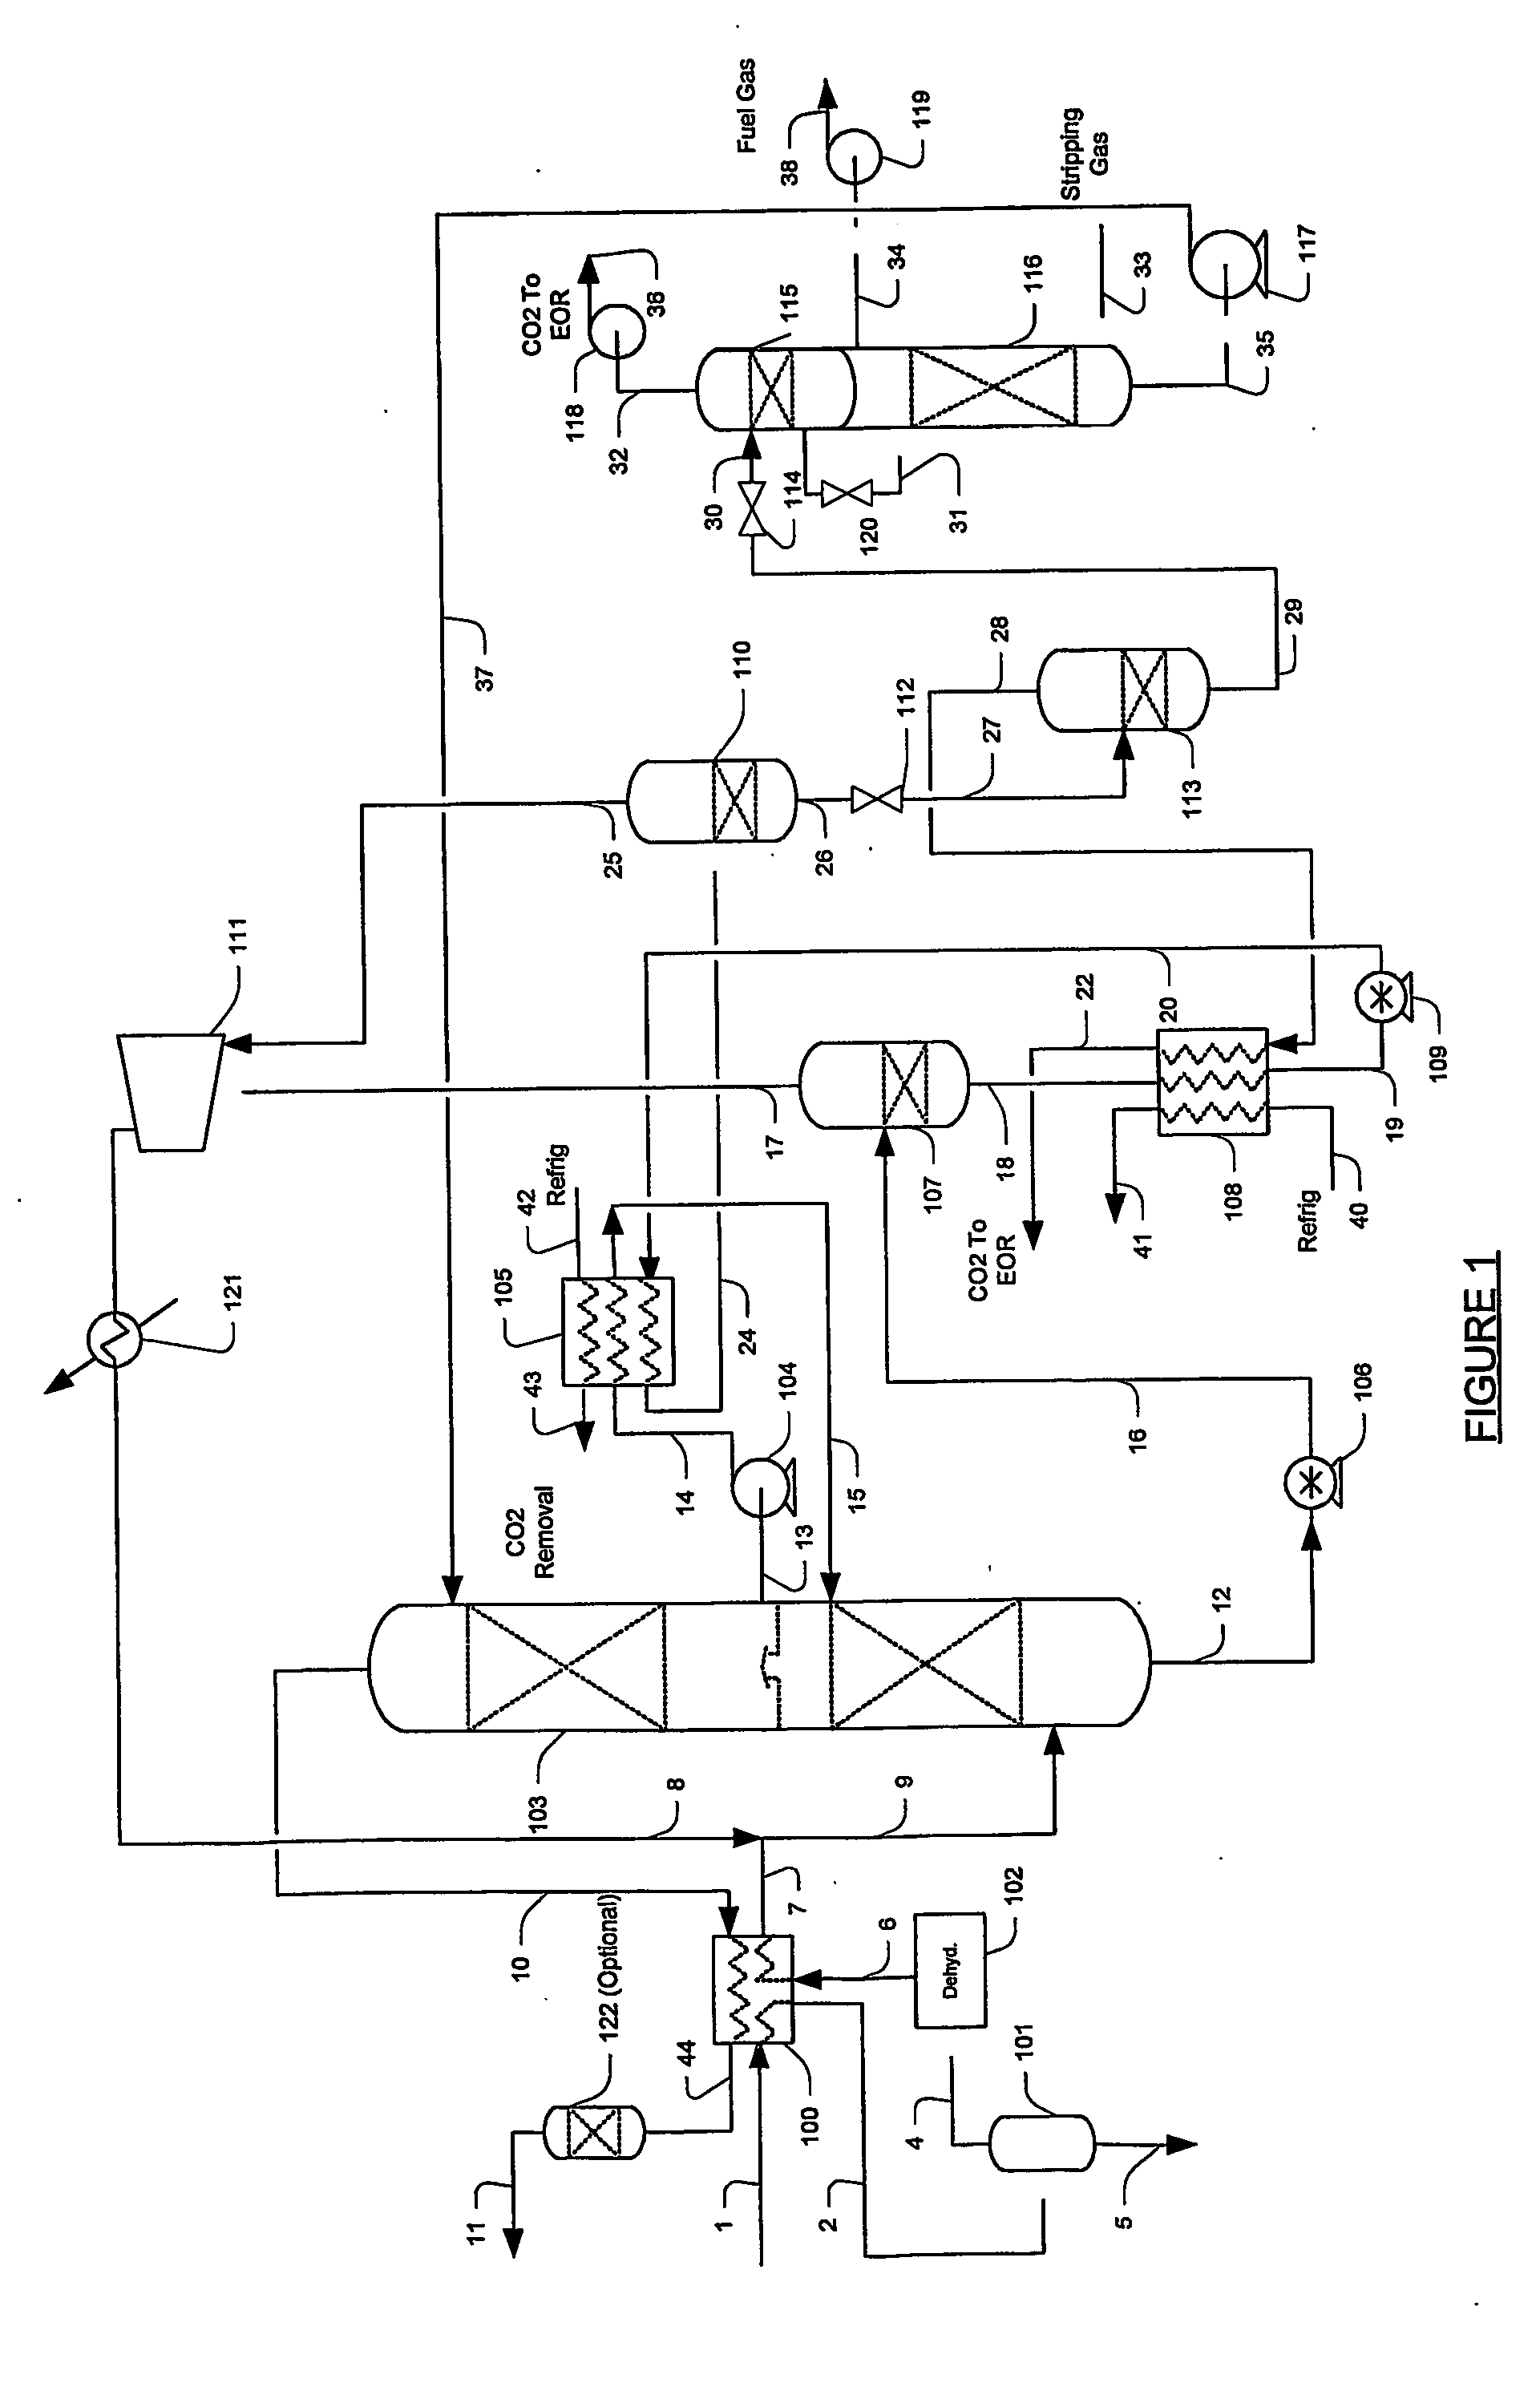 Configurations and method for improved gas removal